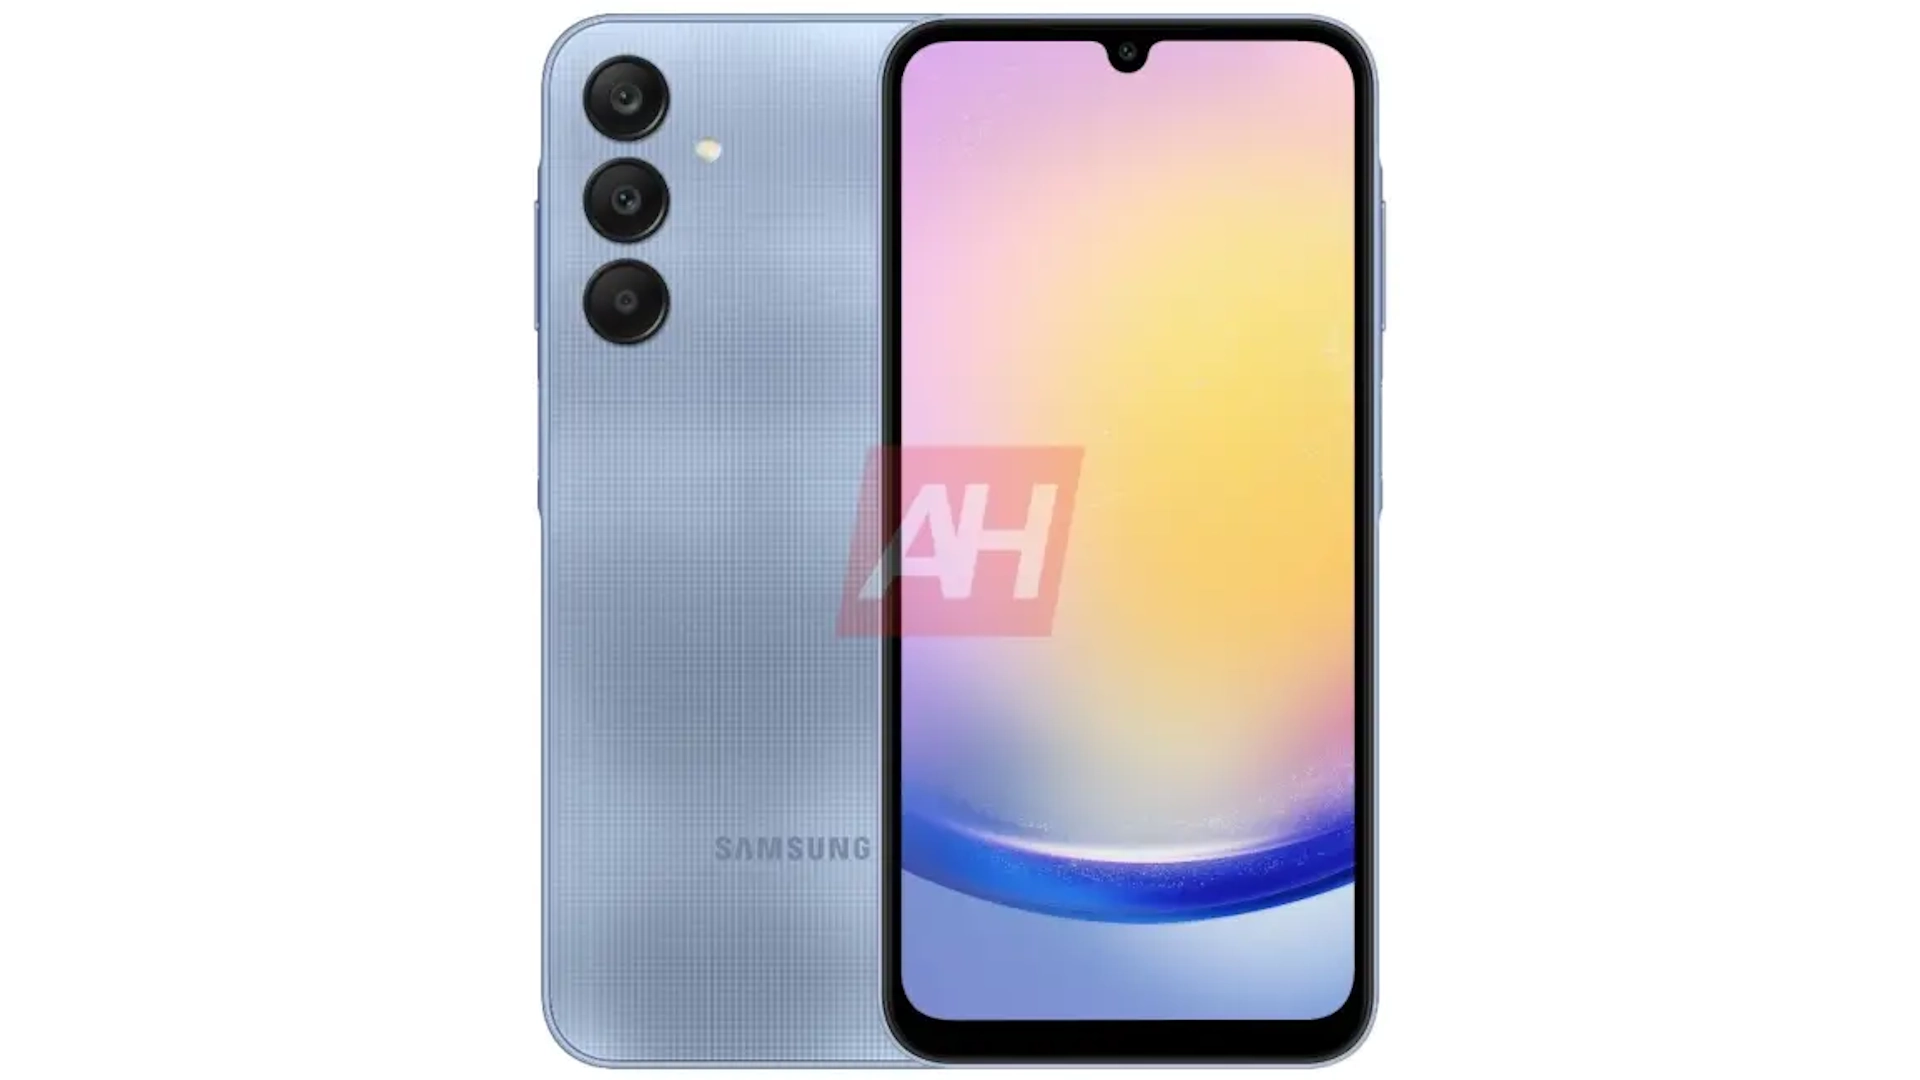 The specifications of the Samsung Galaxy A25 5G phone are making the rounds on the internet in yet another leak